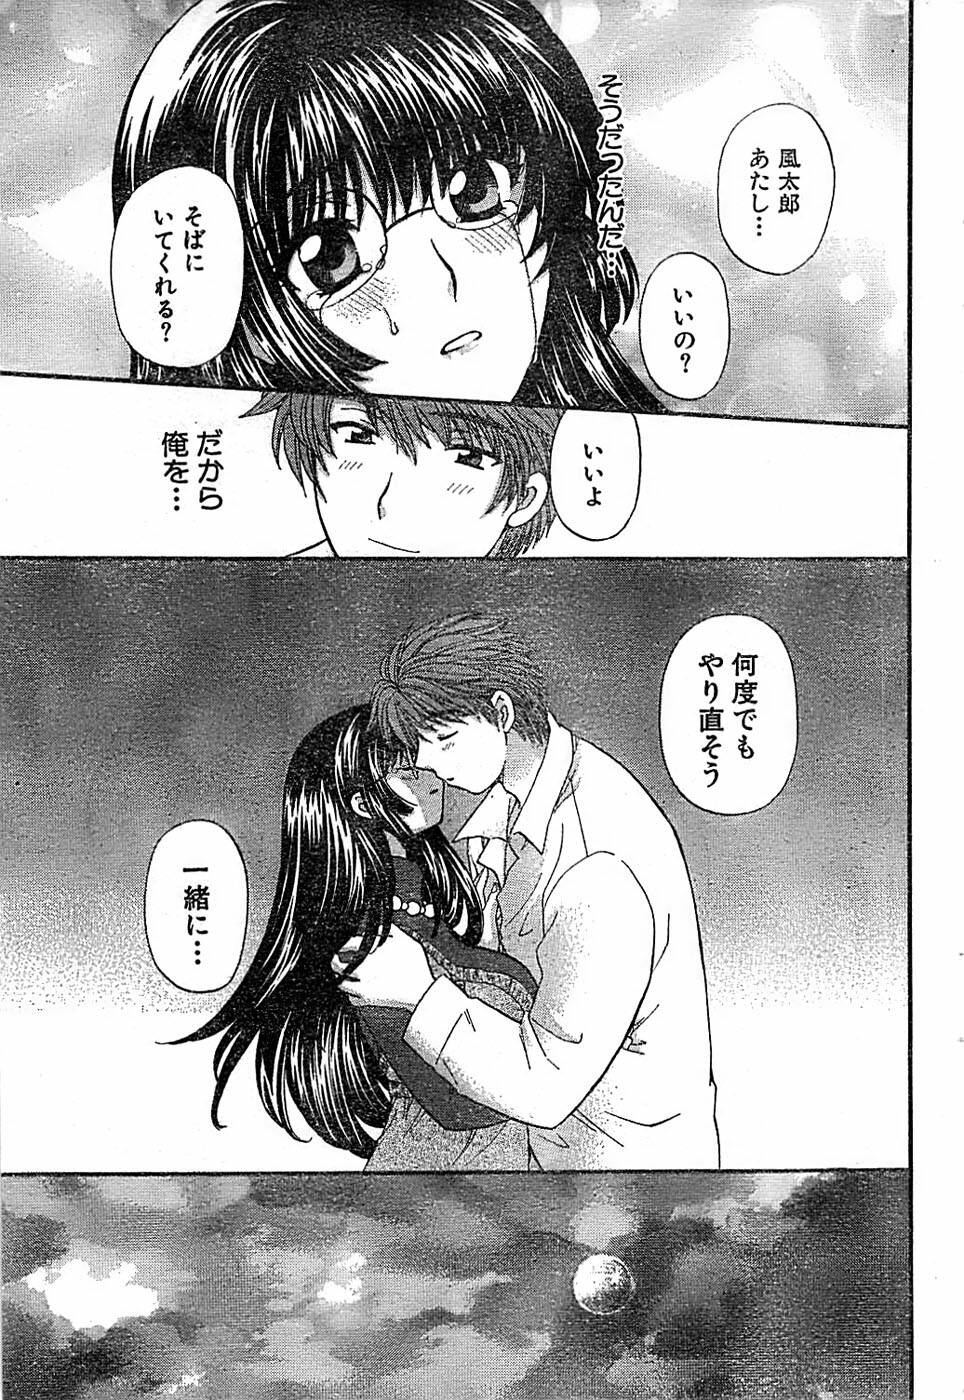 Doki! Special 2006-04 page 45 full